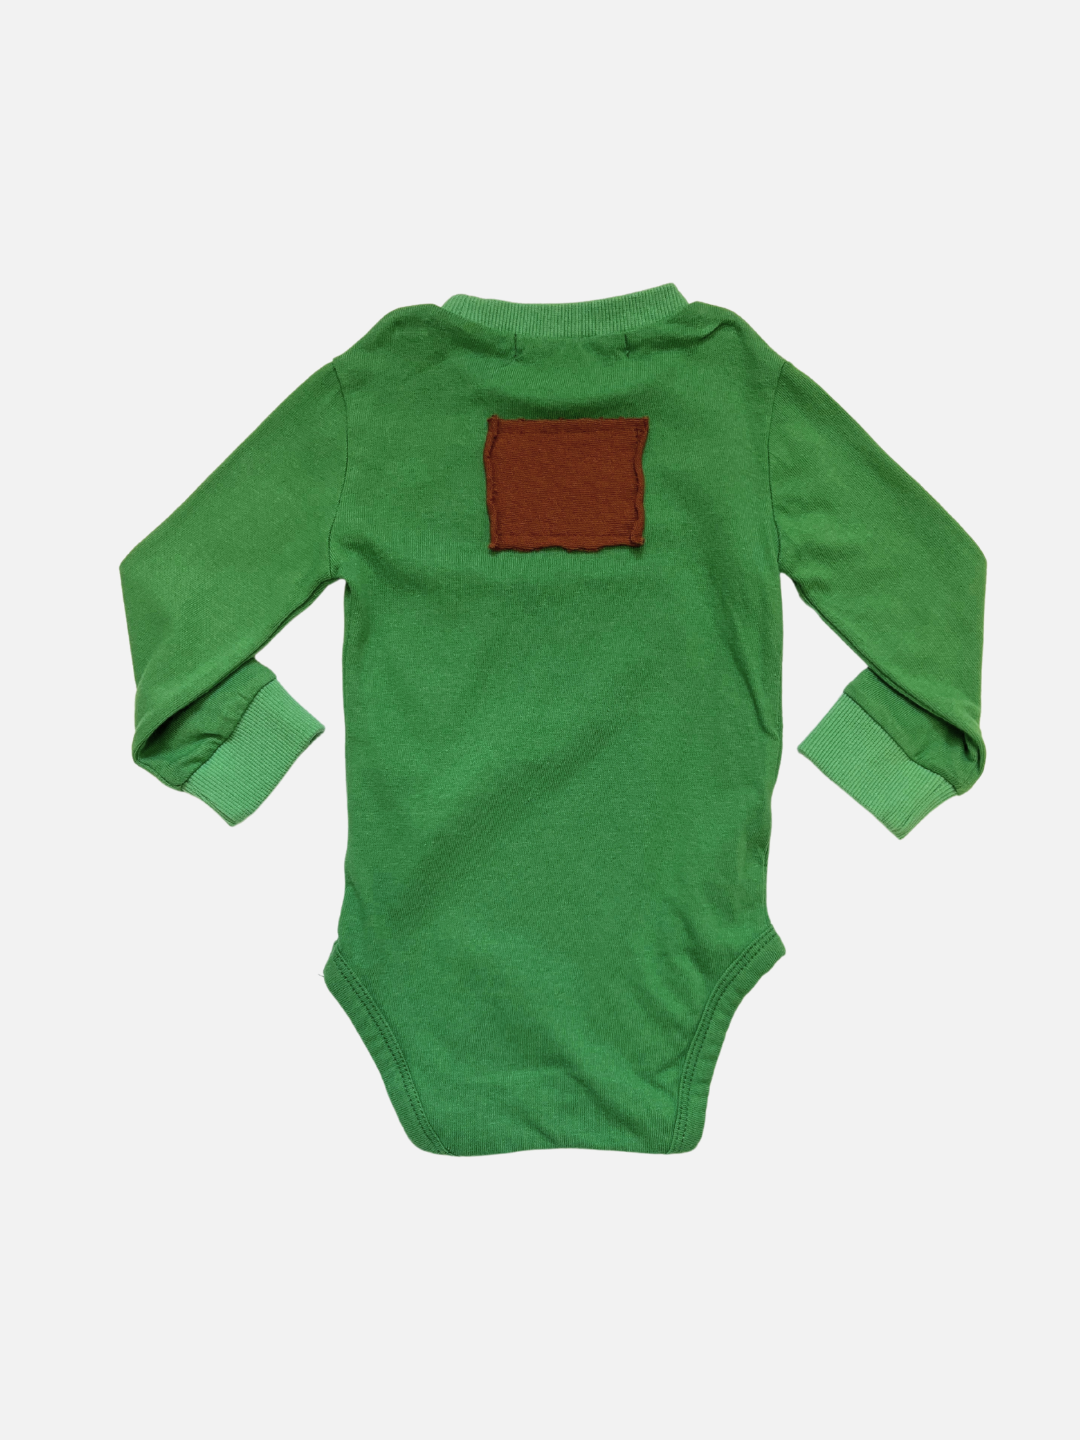 Green | A back view of the patch onesie in Green with a brown rectangular patch on the back